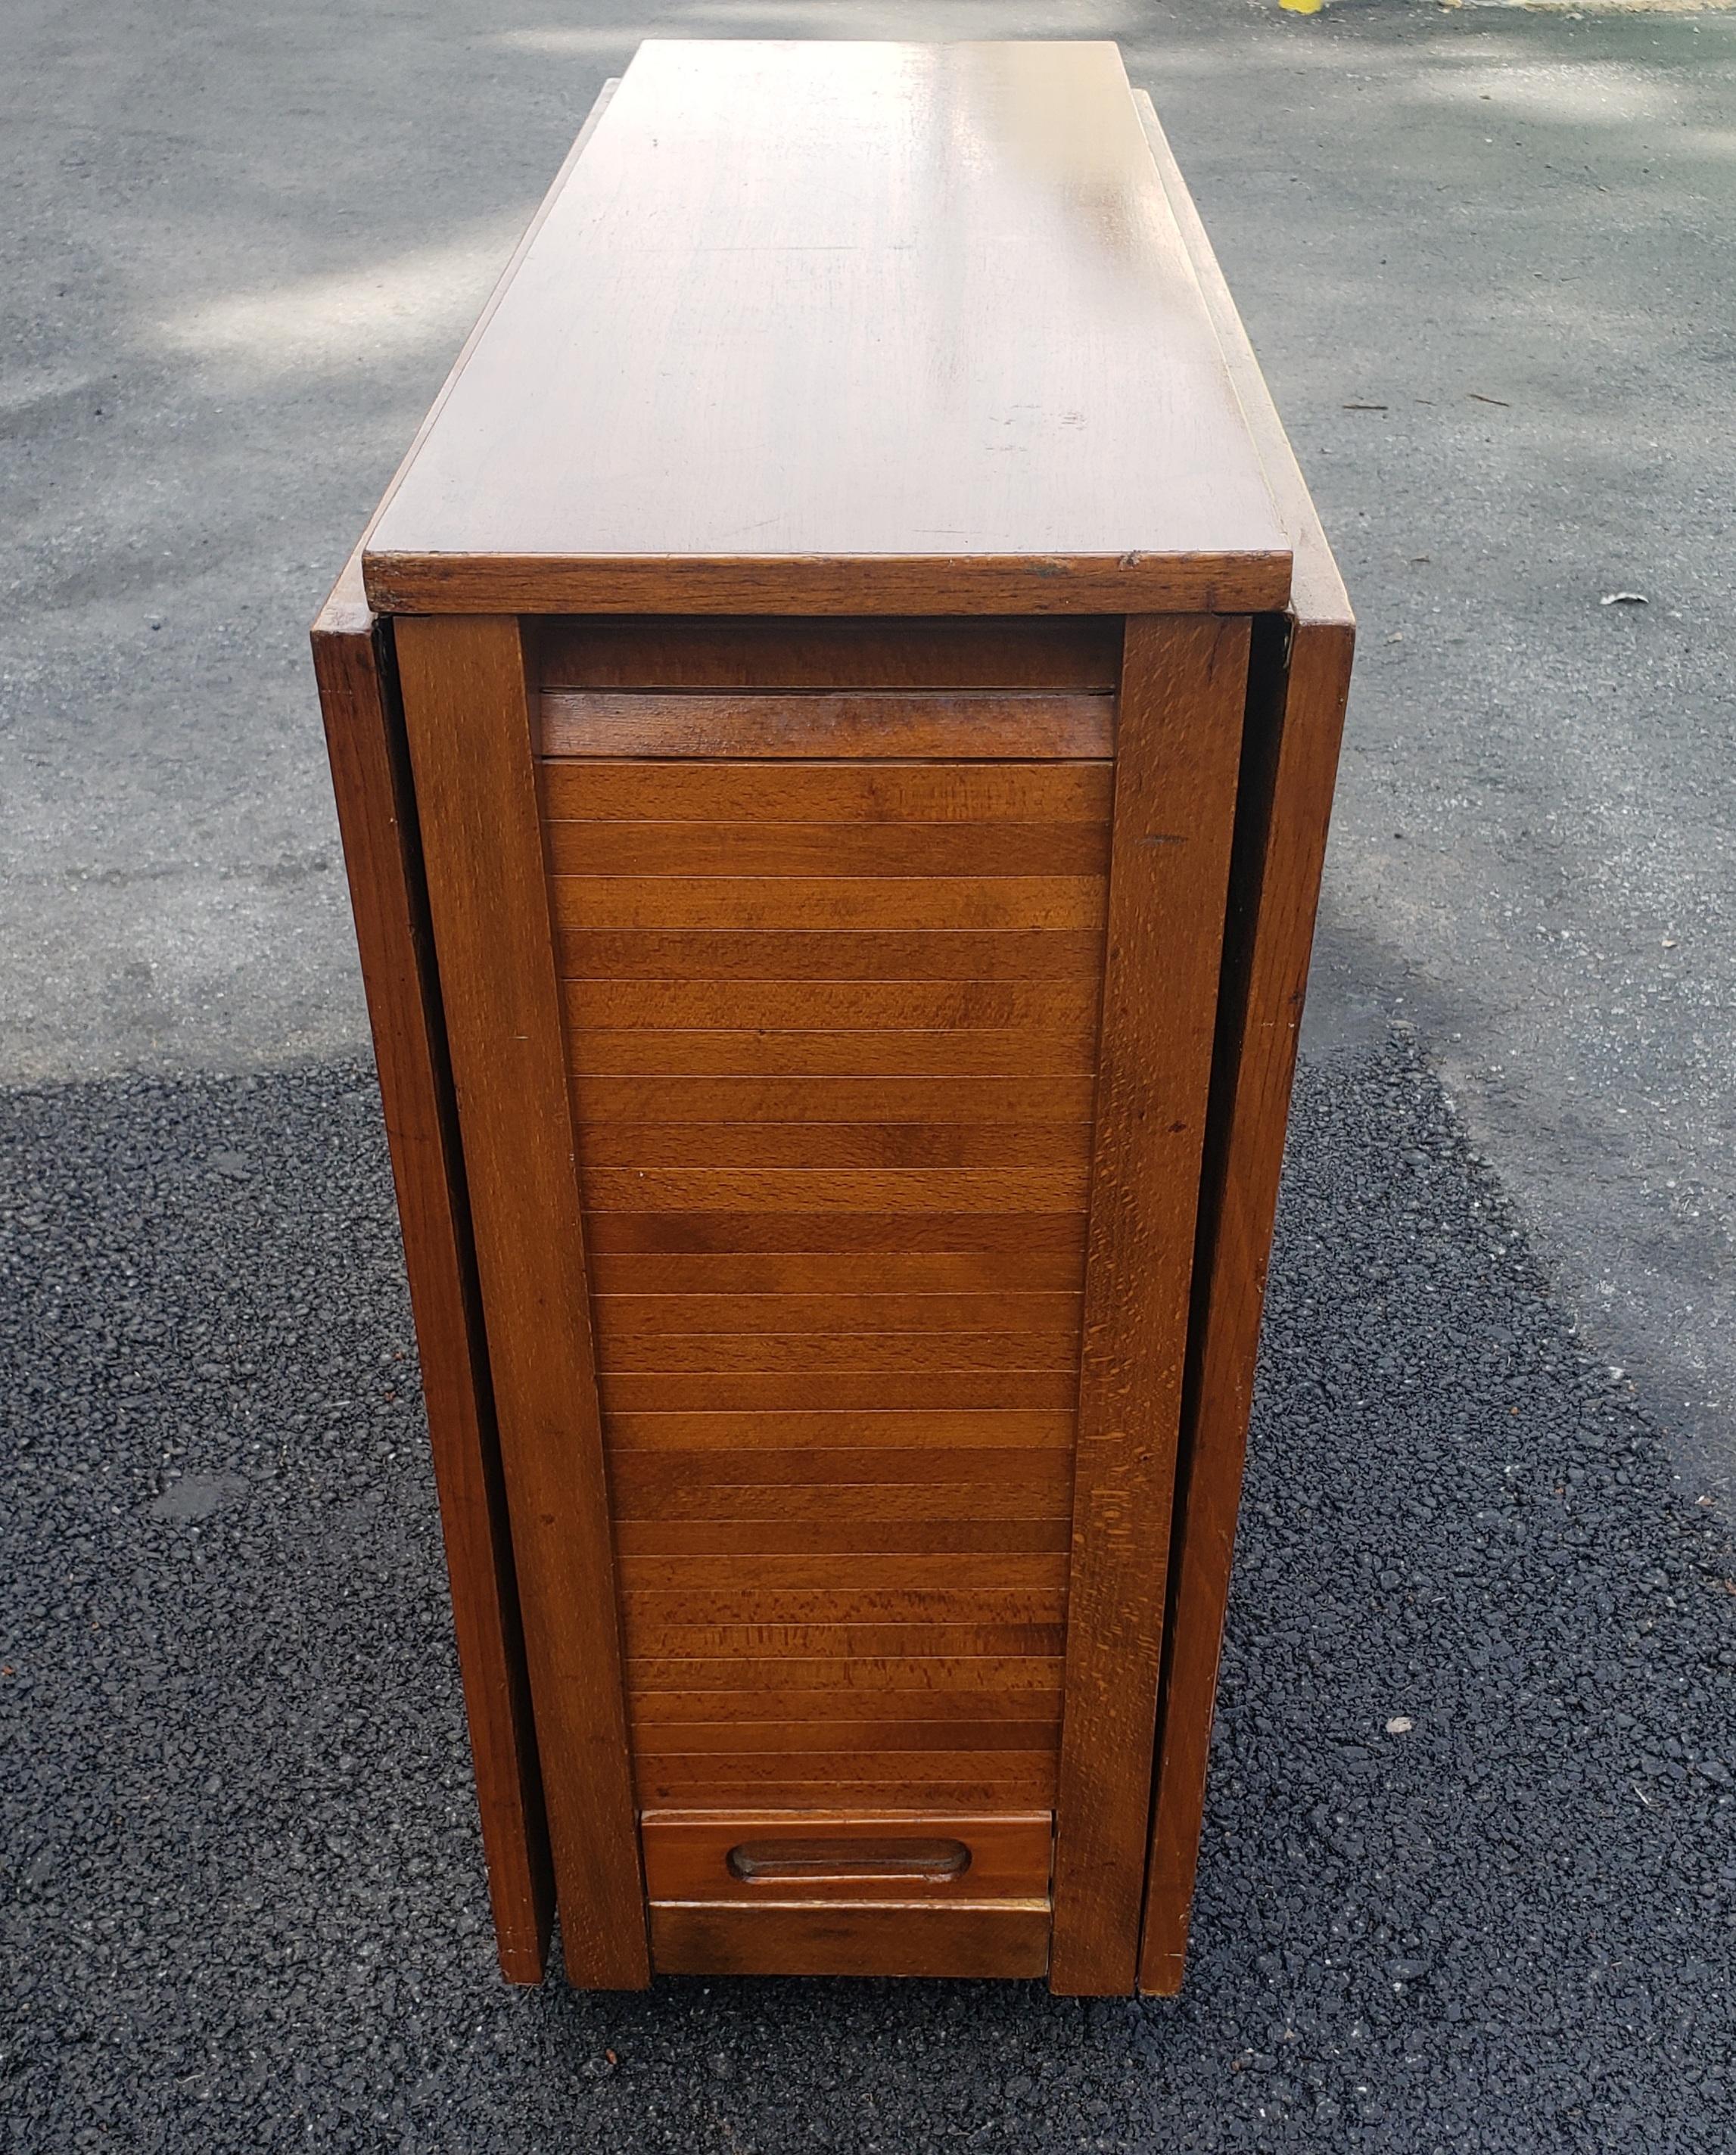 Mid-Century Danish Modern Teak Drop-Leaf Dining Table with Storage on Rollers For Sale 6